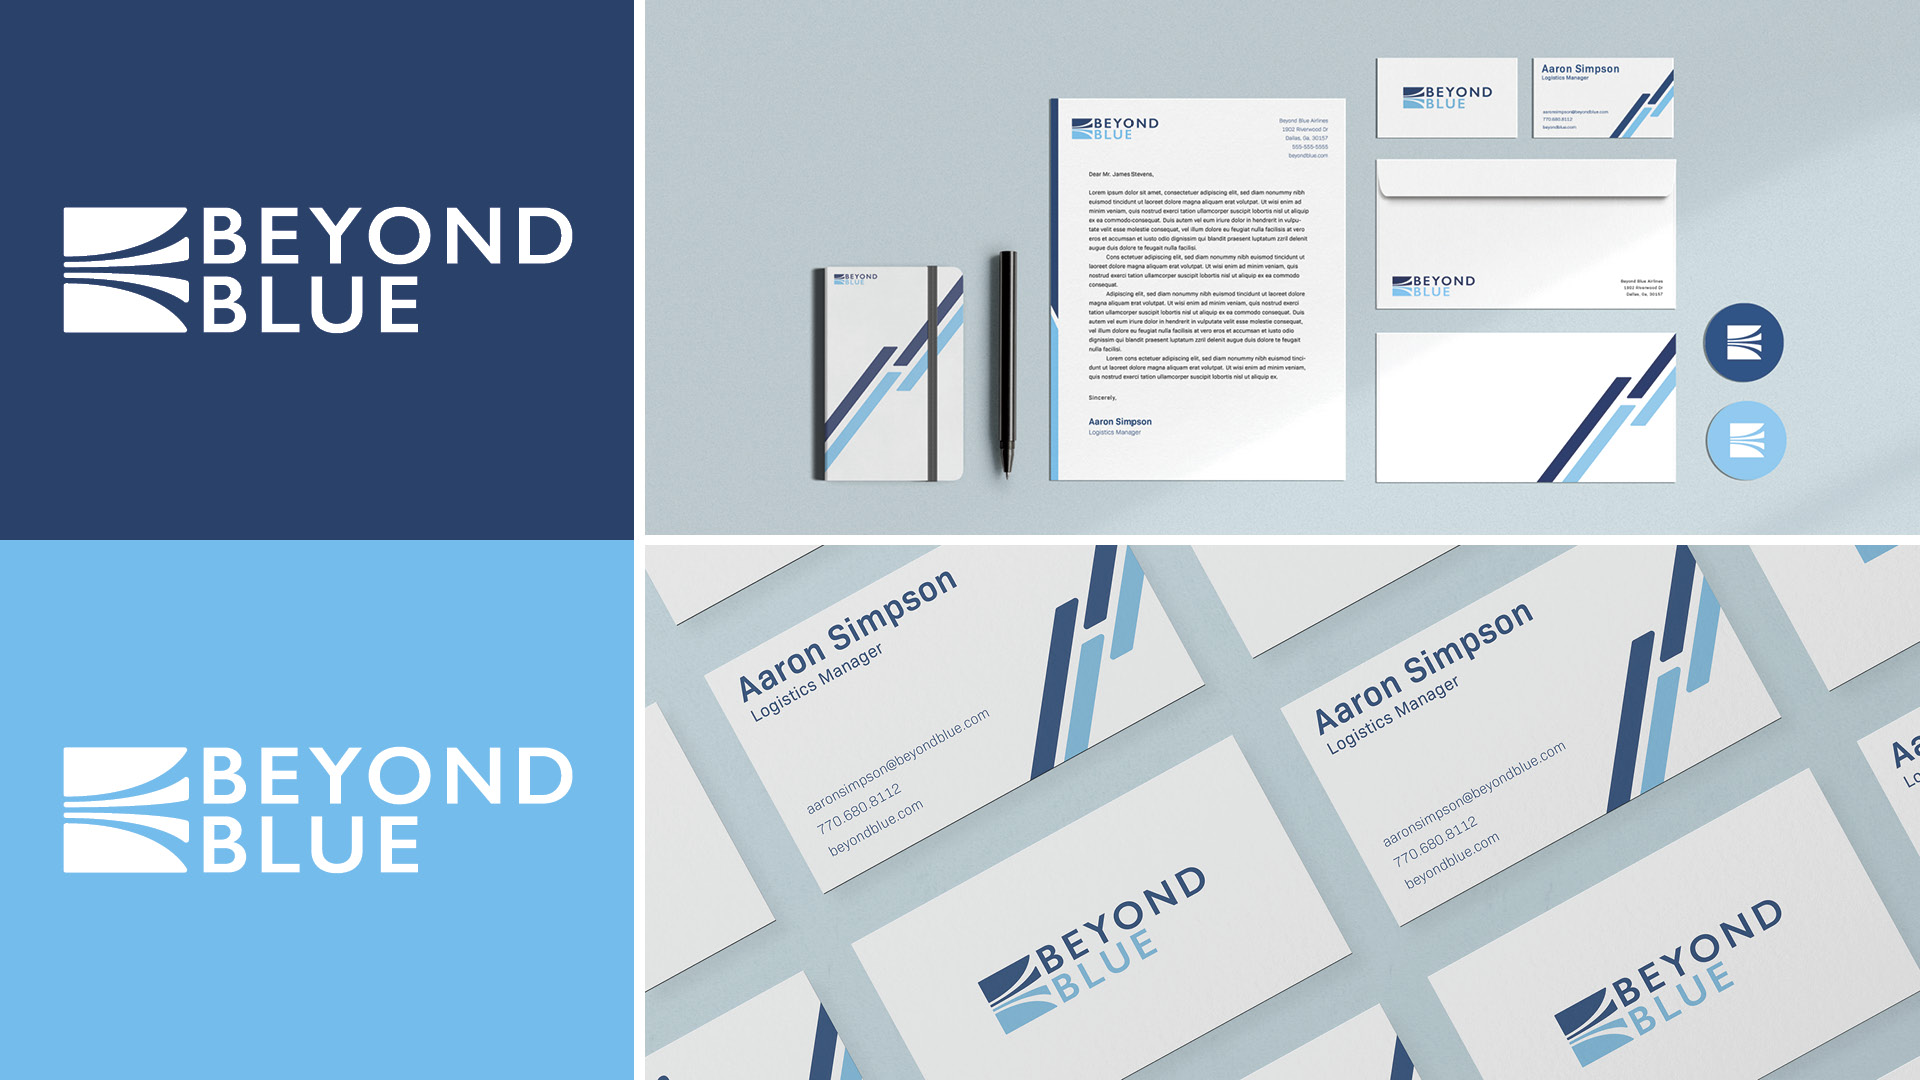  / “Beyond Blue,” logo and stationery, 2020. Logo made for Beyond Blue, and airlines service that wants to brand themselves as strong and dependable to their customers.